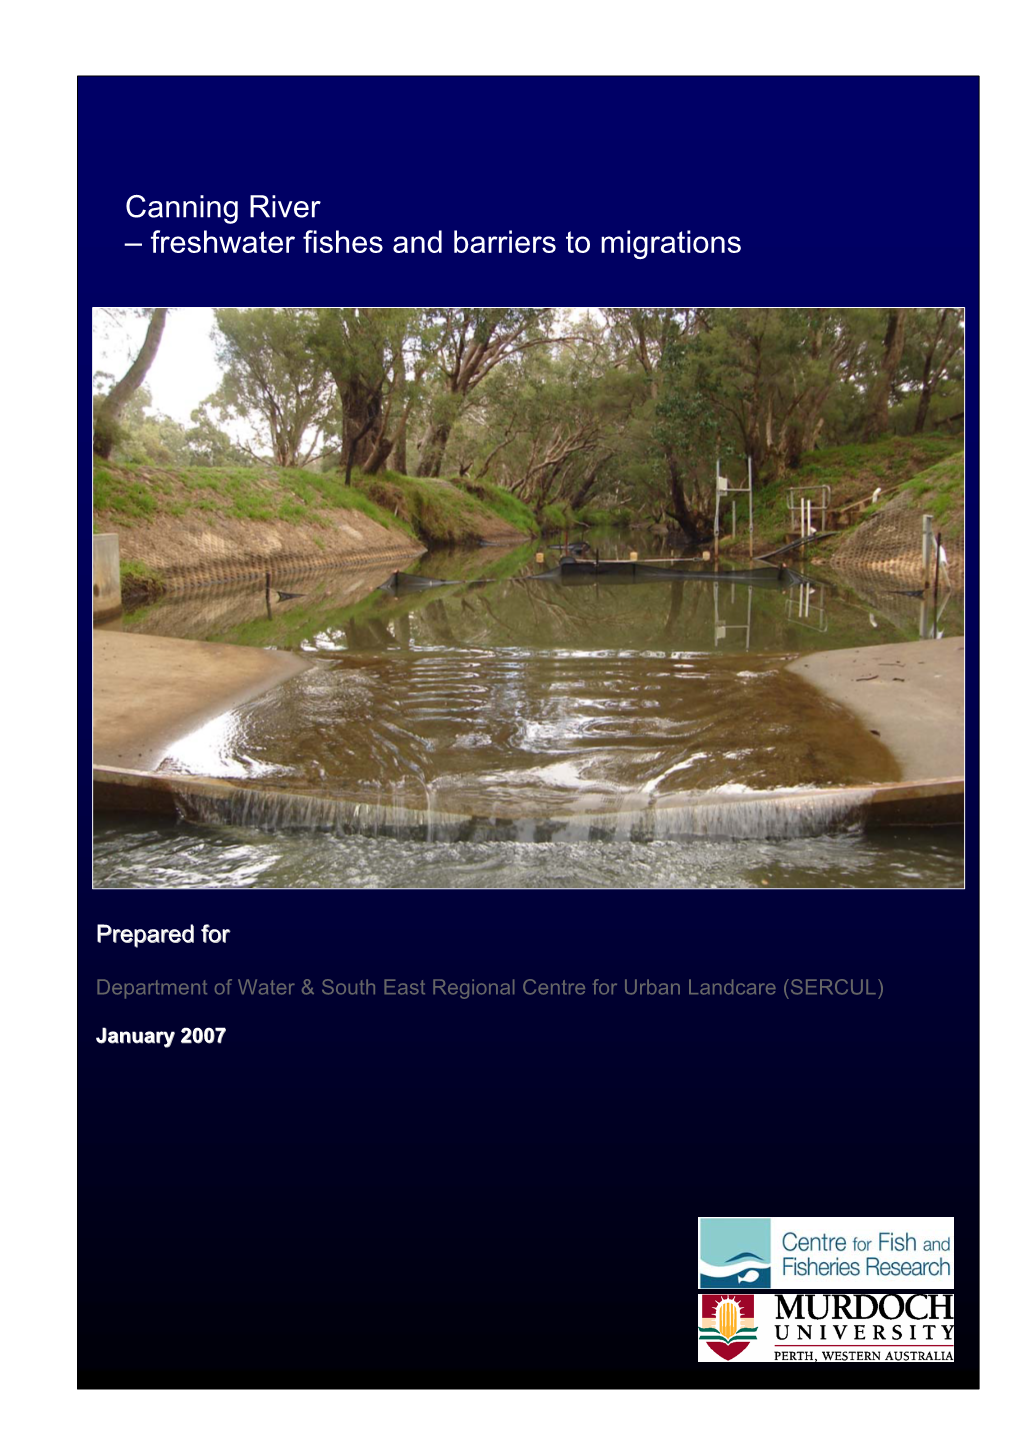 Canning River – Freshwater Fishes and Barriers to Migrations